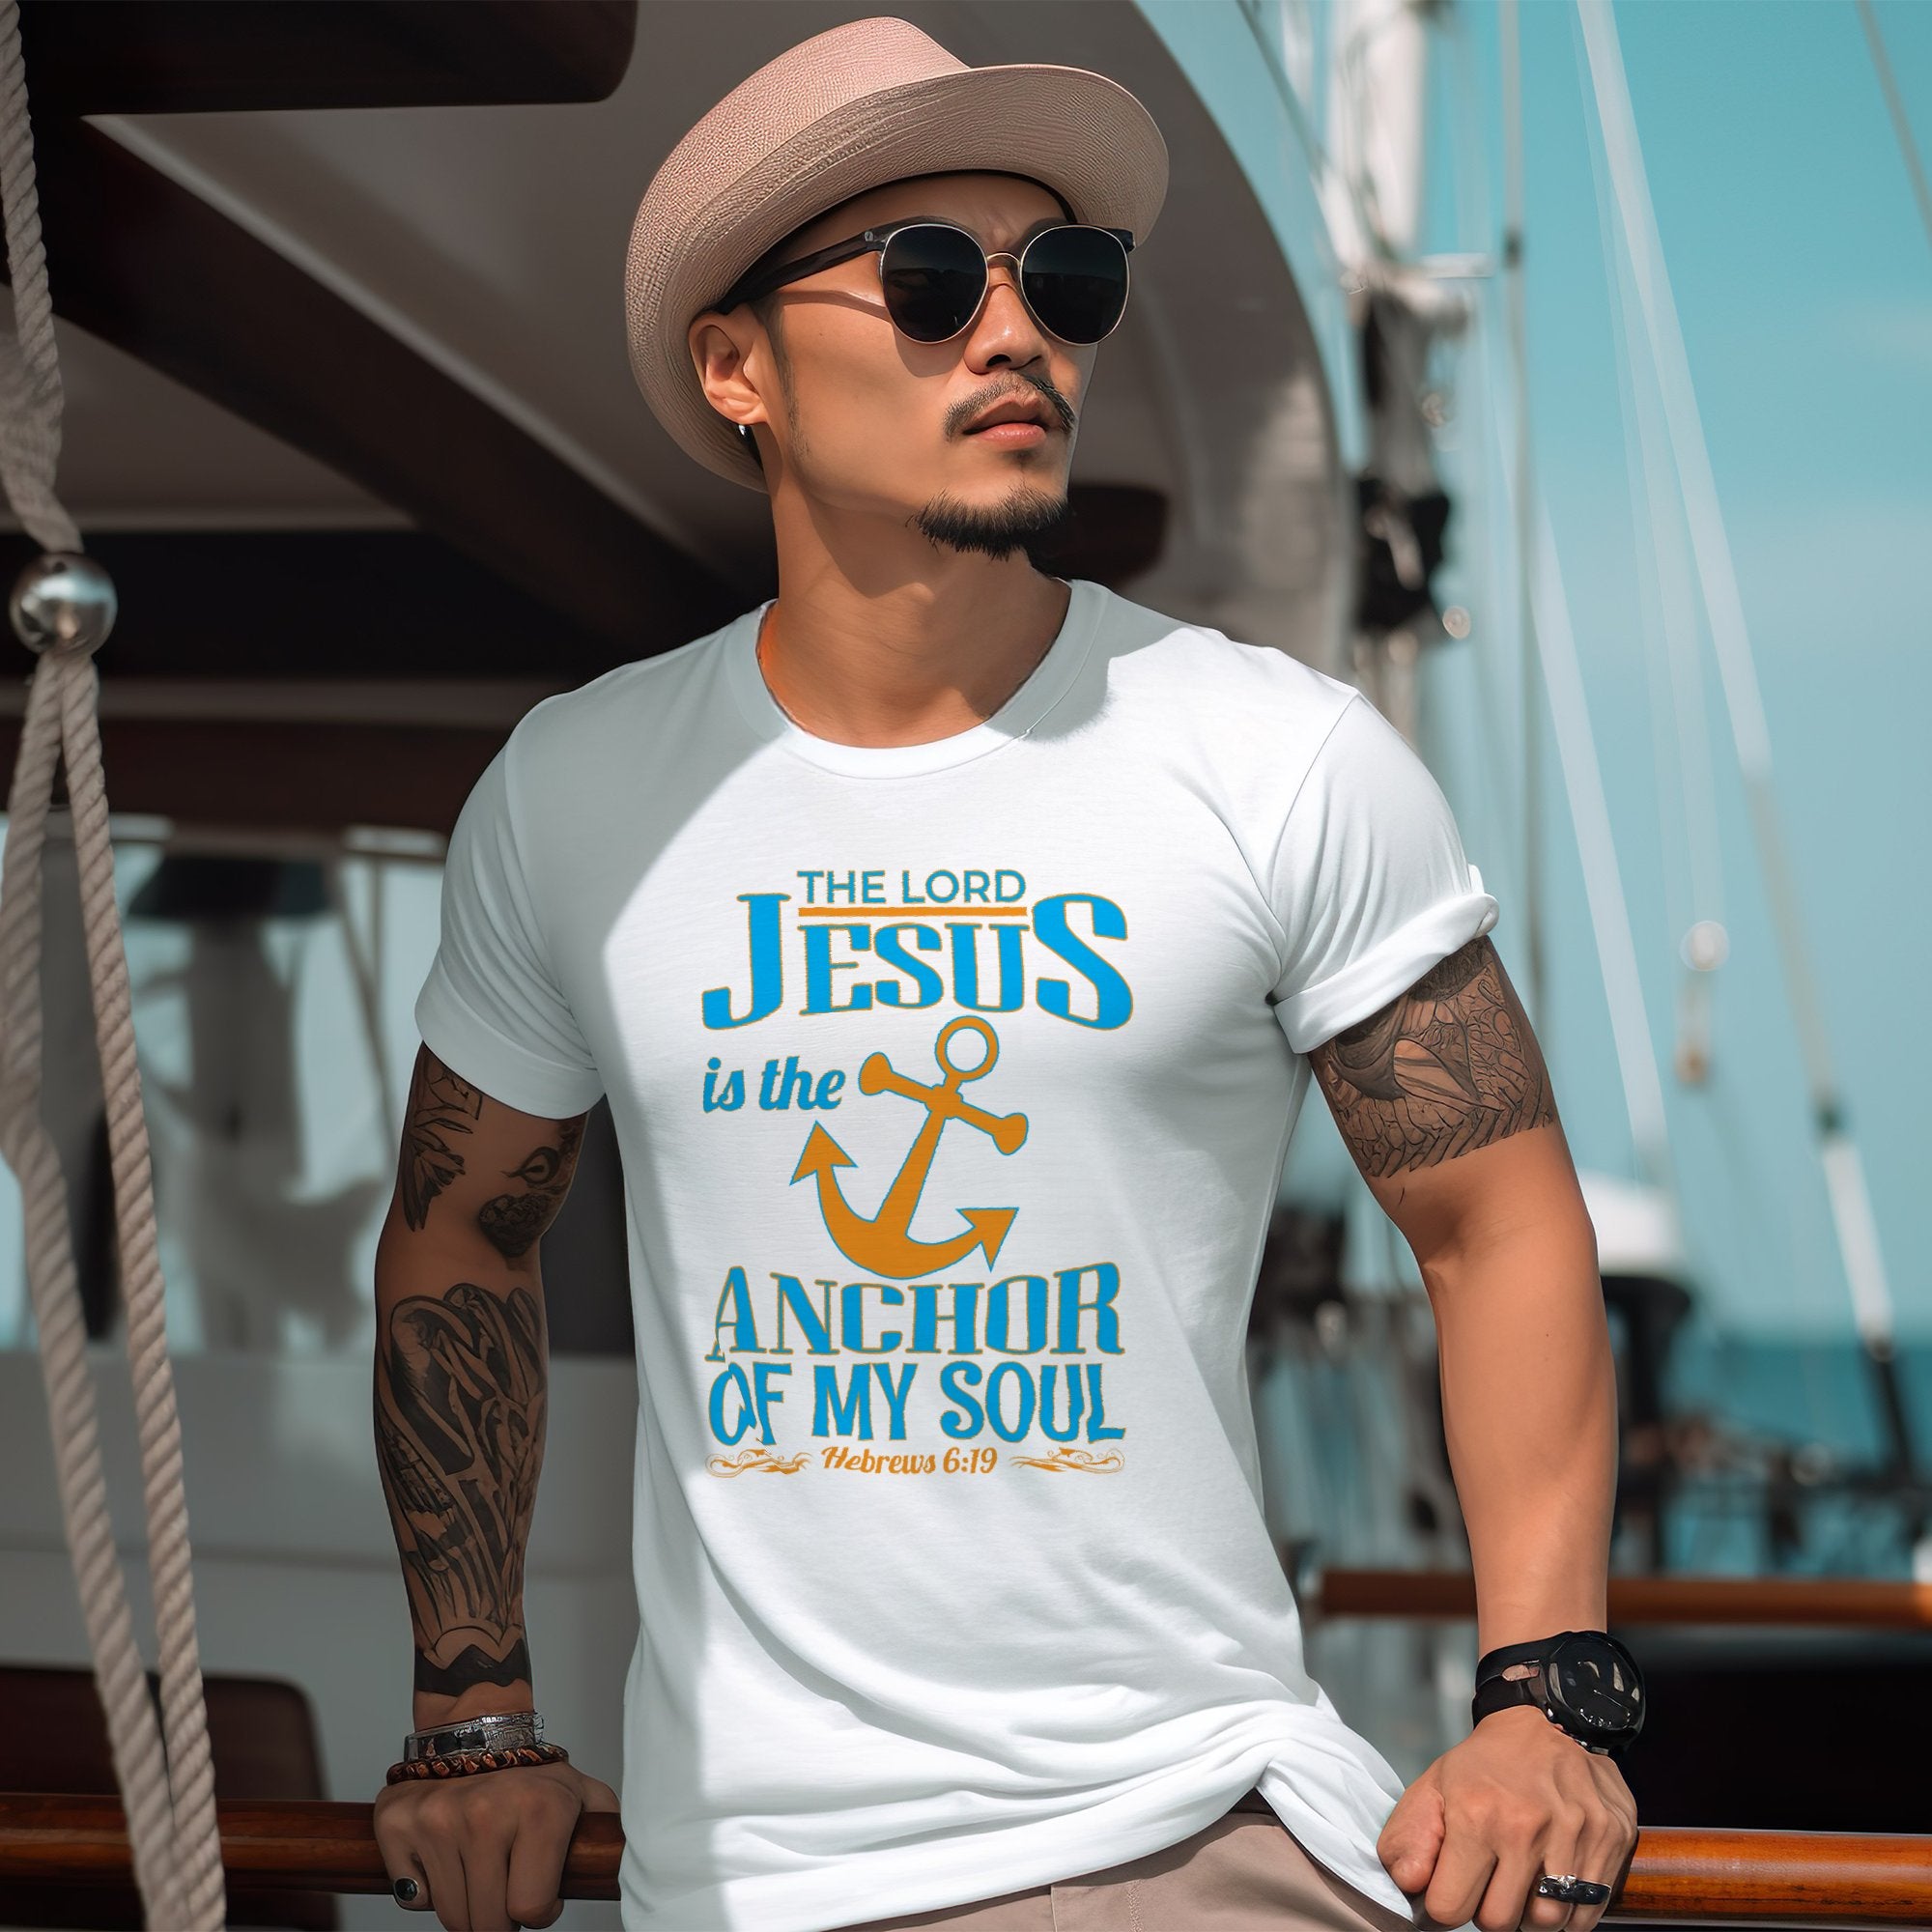 Jesus is the Anchor of my Soul Men's Jersey Short Sleeve Tee Size: XS Color: Solid Black Blend Jesus Passion Apparel